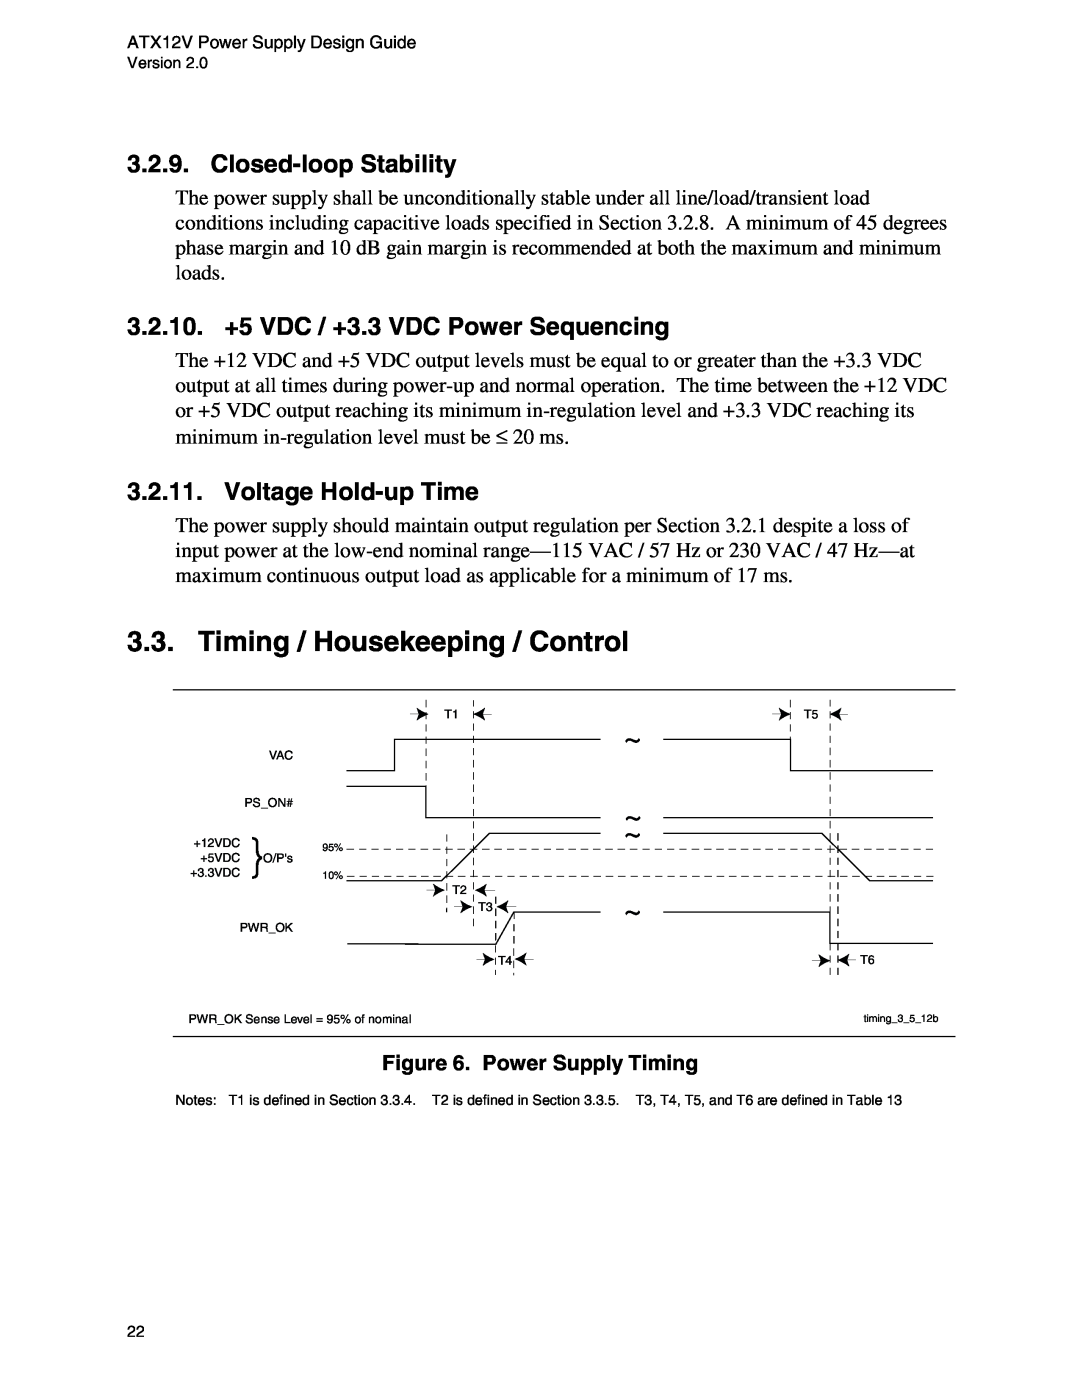 Intel ATX12V Timing / Housekeeping / Control, Closed-loop Stability, 3.2.10. +5 VDC / +3.3 VDC Power Sequencing, ~ ~ ~ ~ 